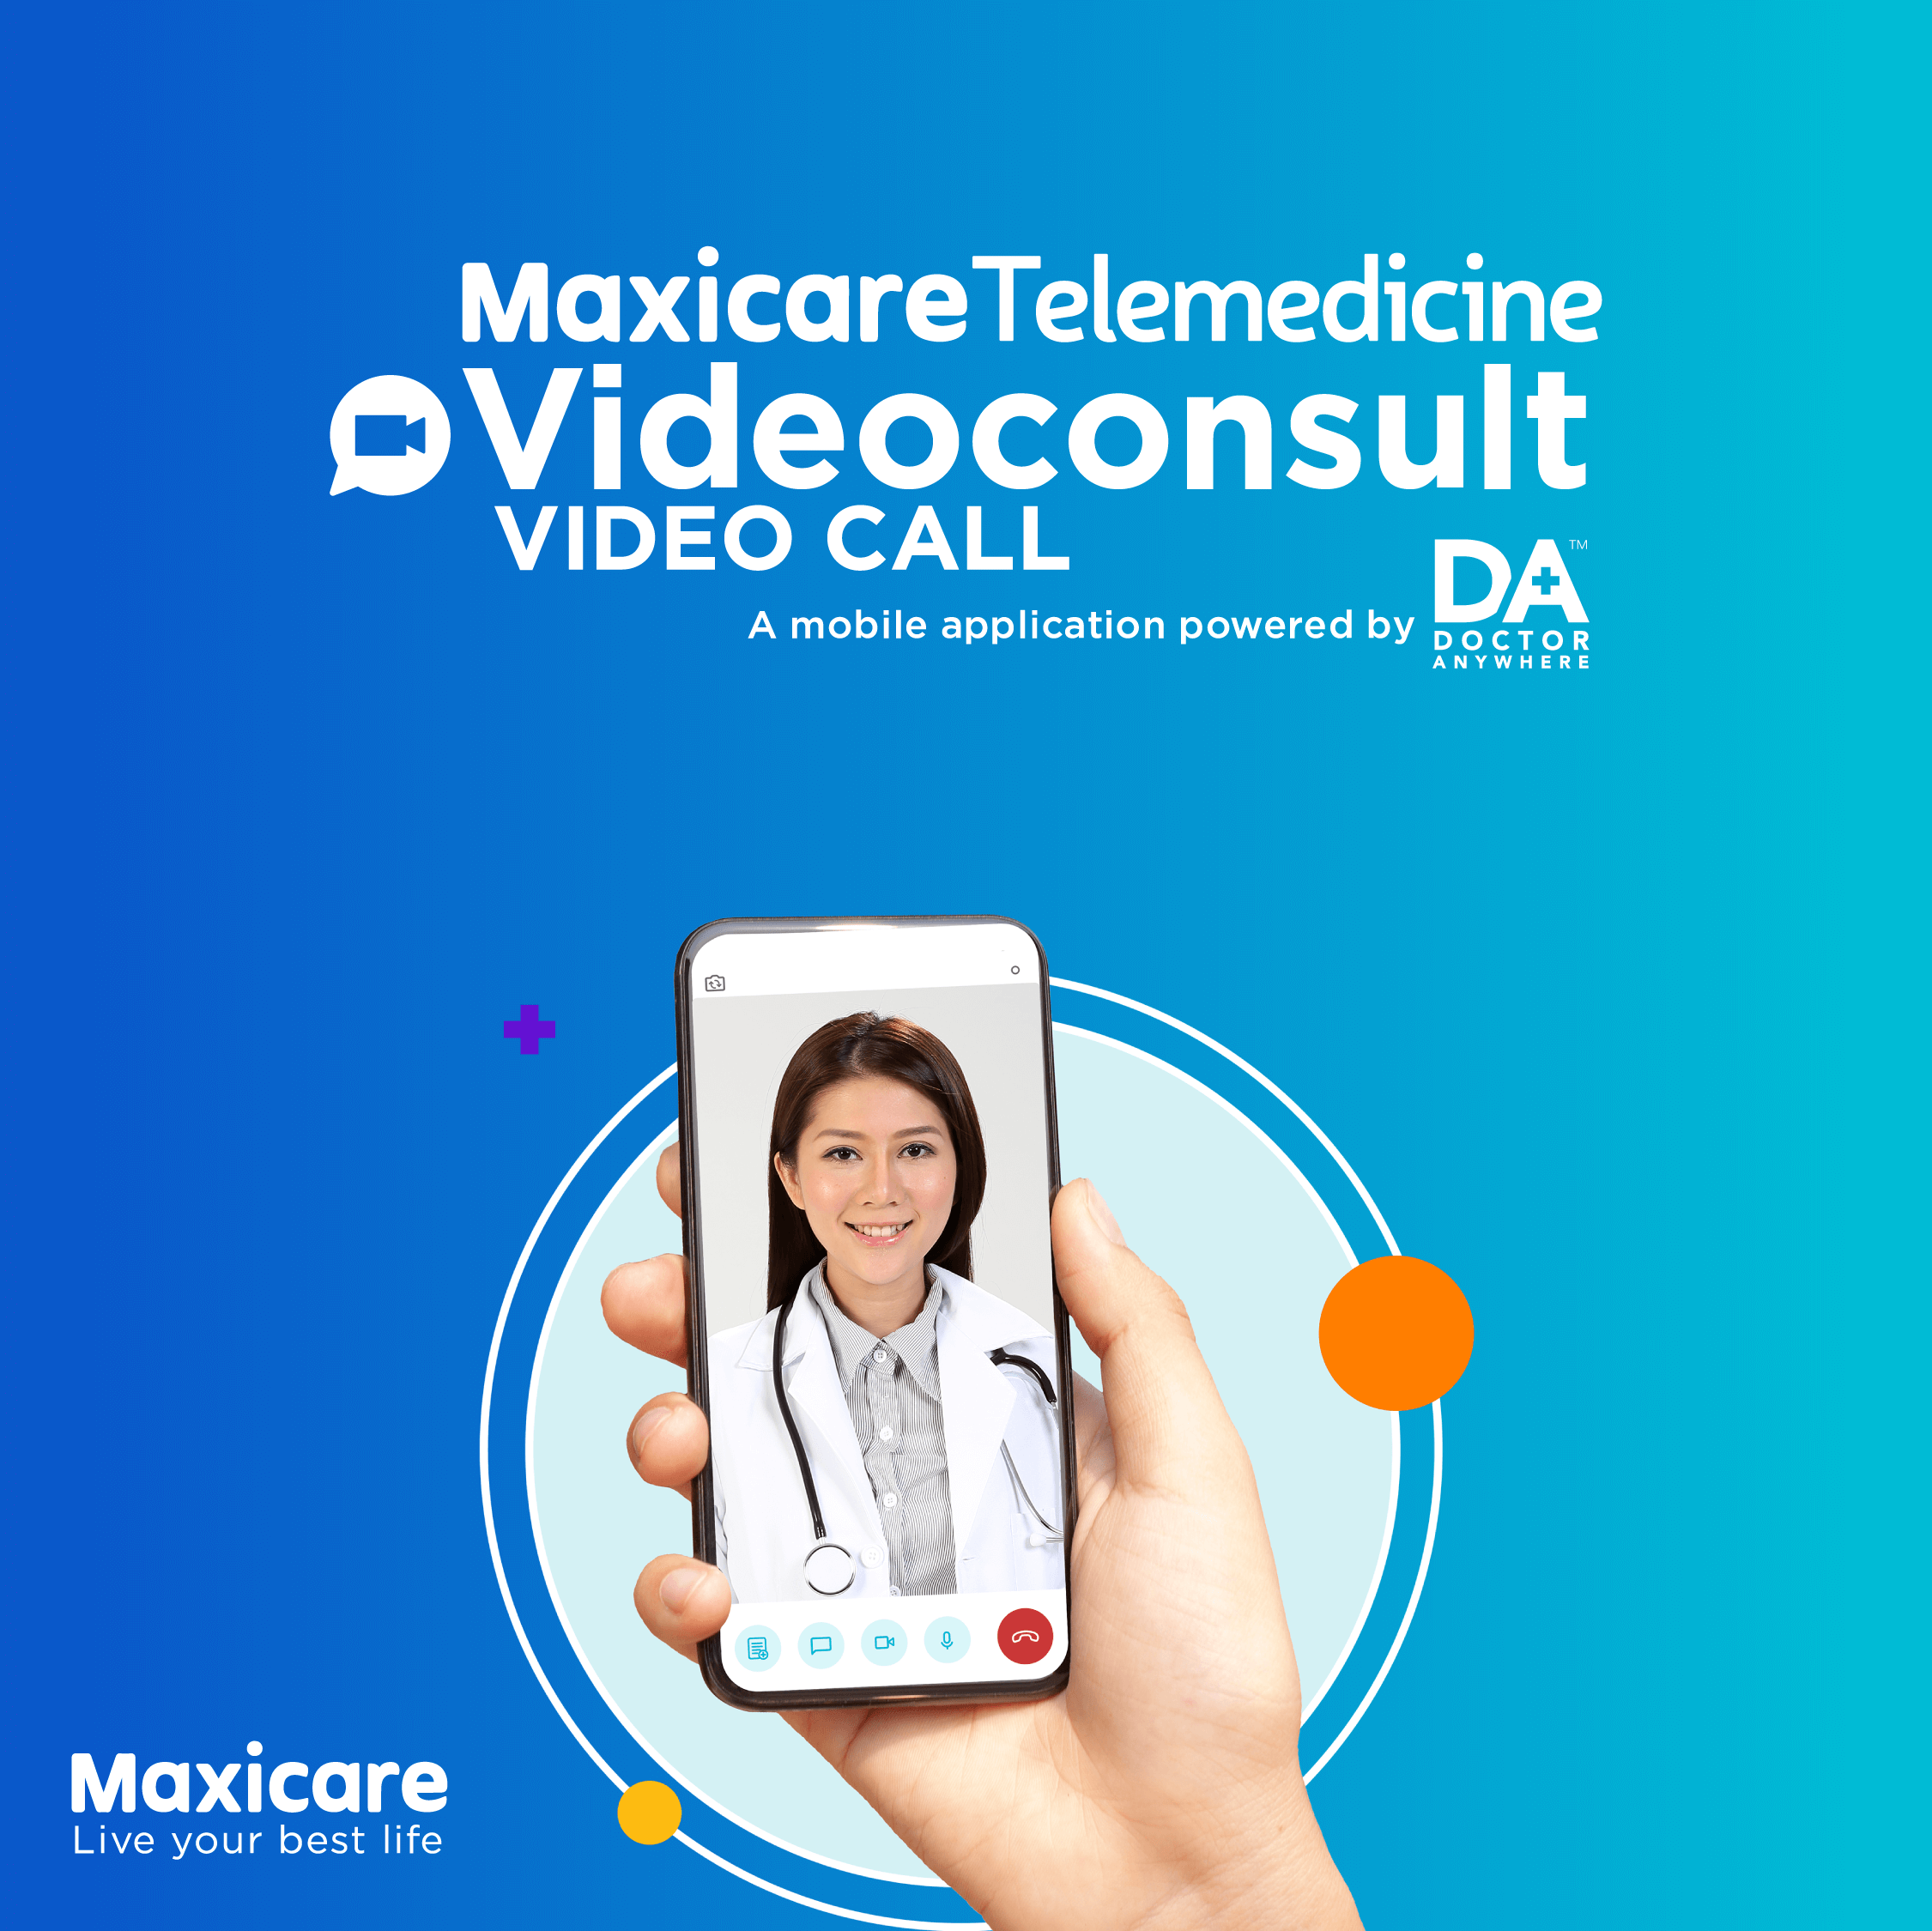 Image shows Maxicare telemedicine consultation via mobile video call with a doctor